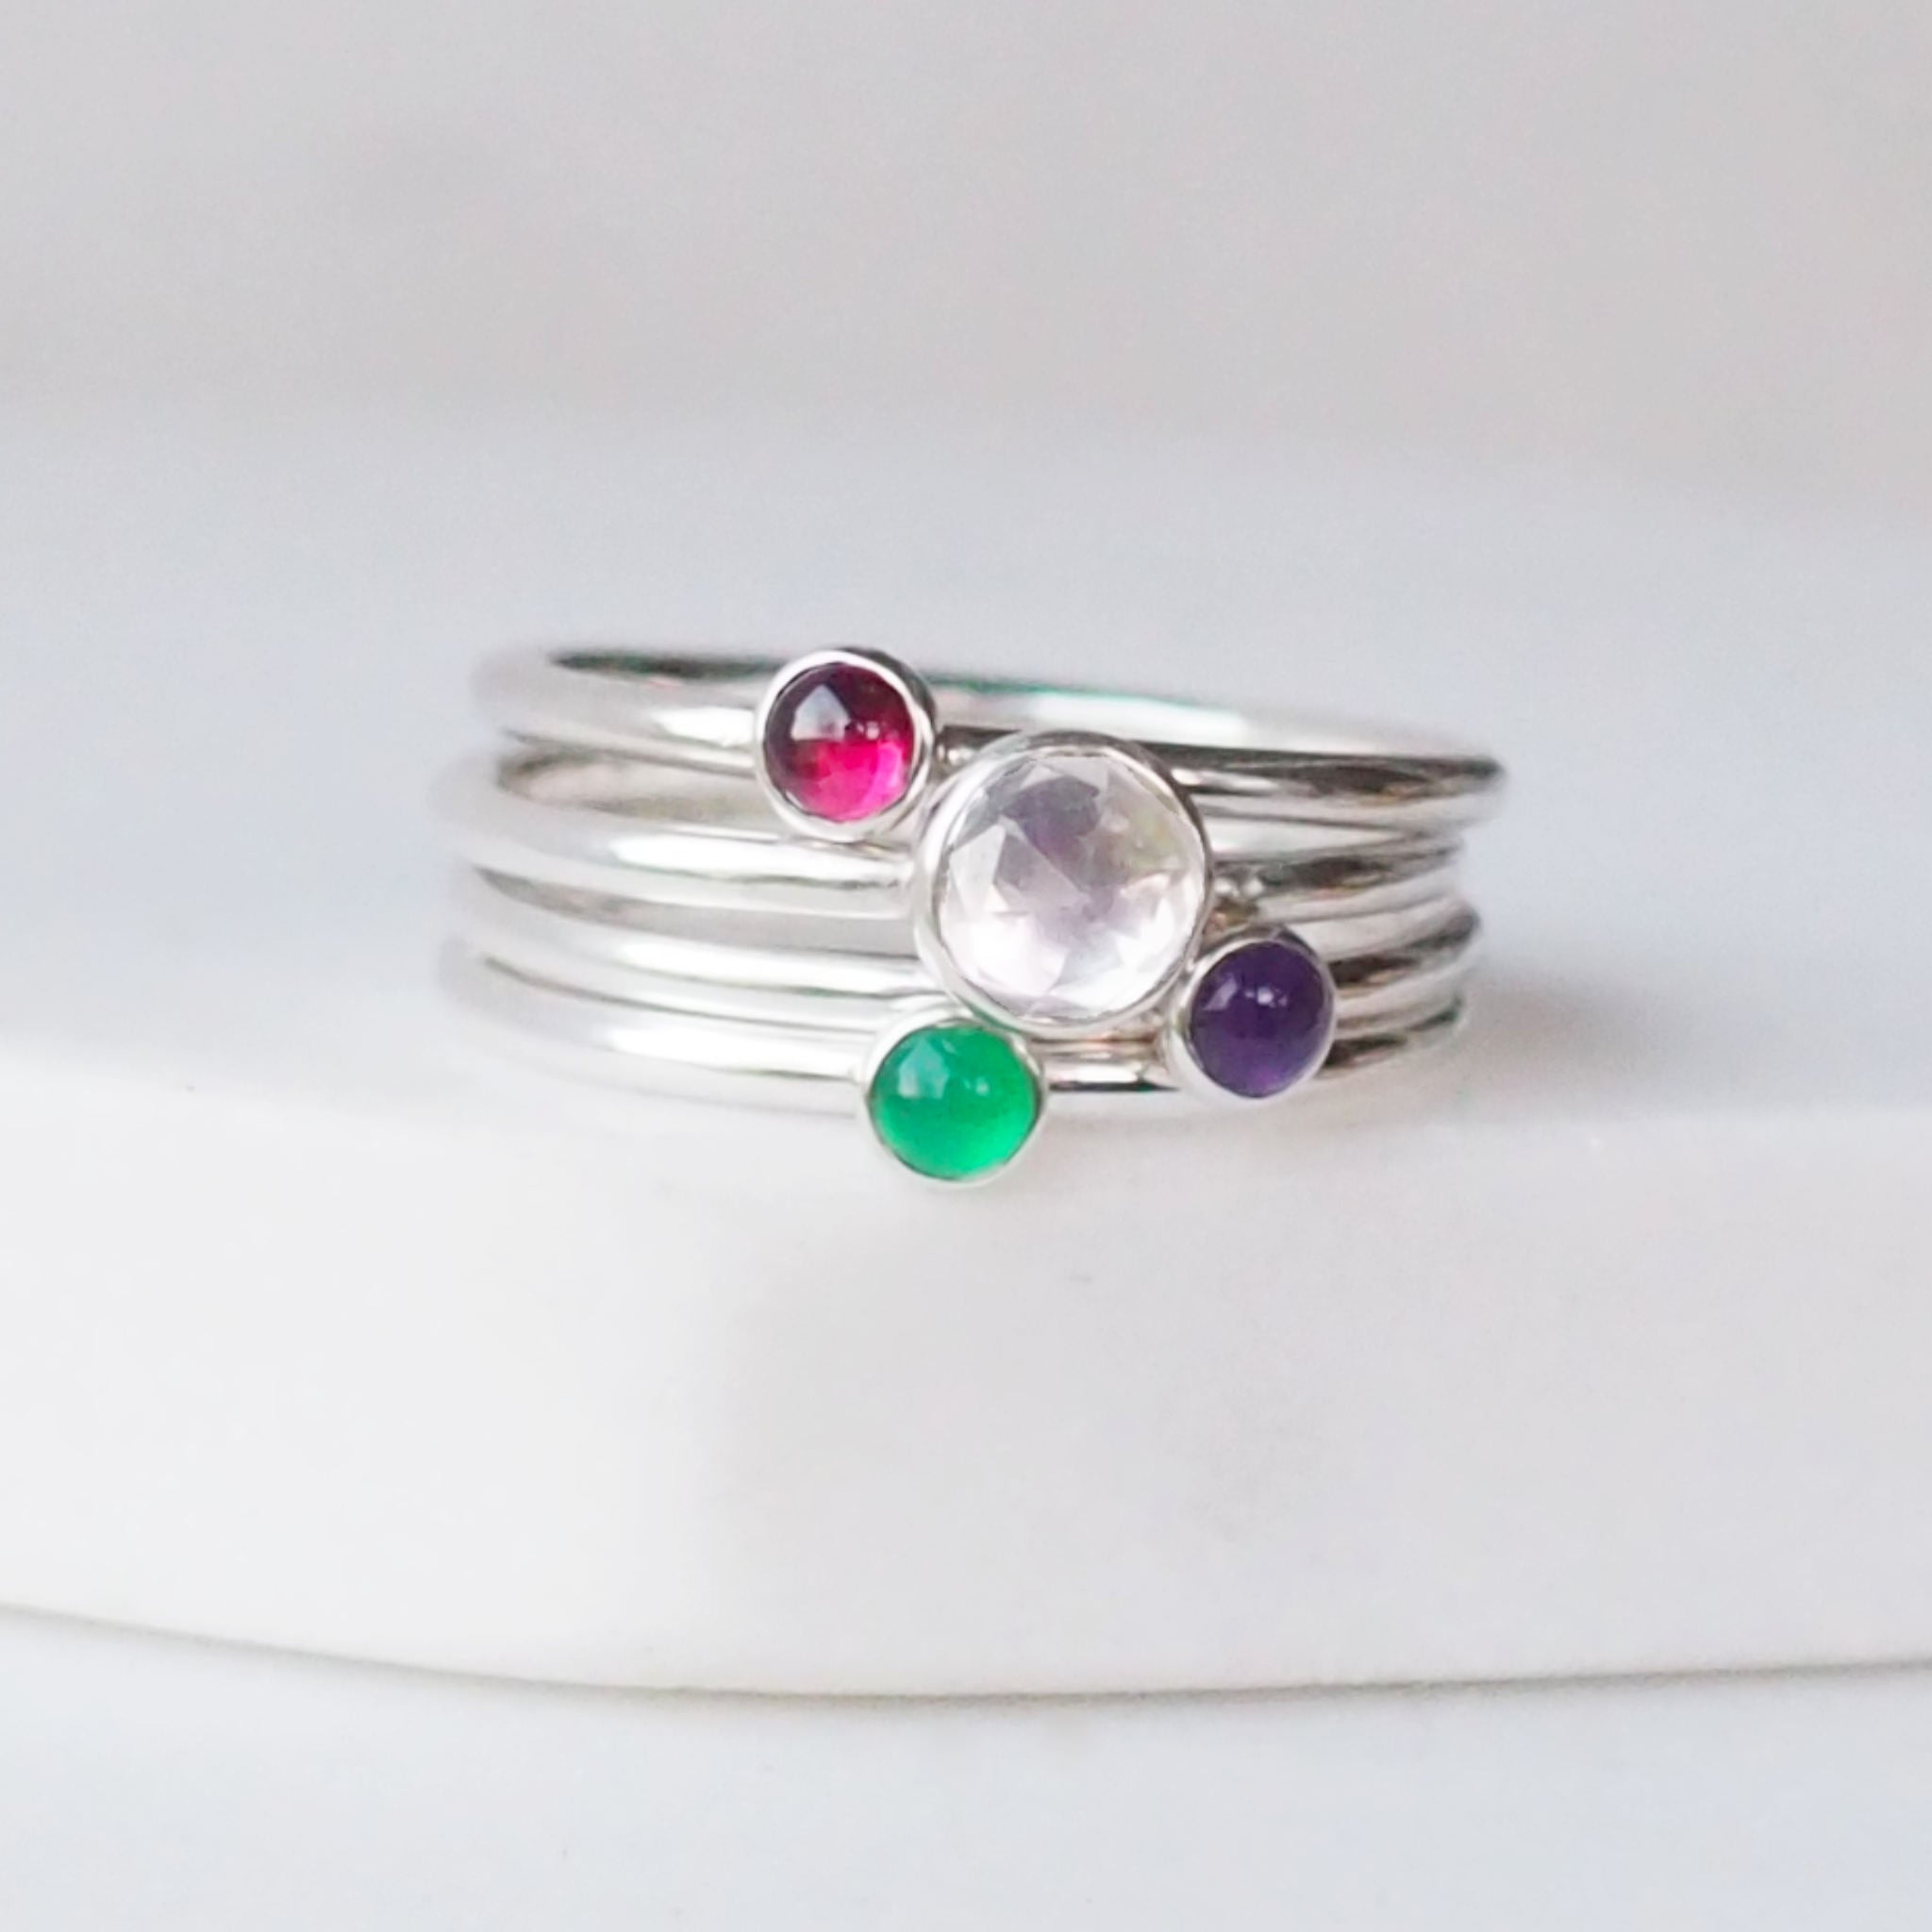 White Topaz, Garnet, Green Agate, and Amethyst four ring birthstone ring set with birthstones for April, January, February and May .Handmade in Scotland by maram jewellery